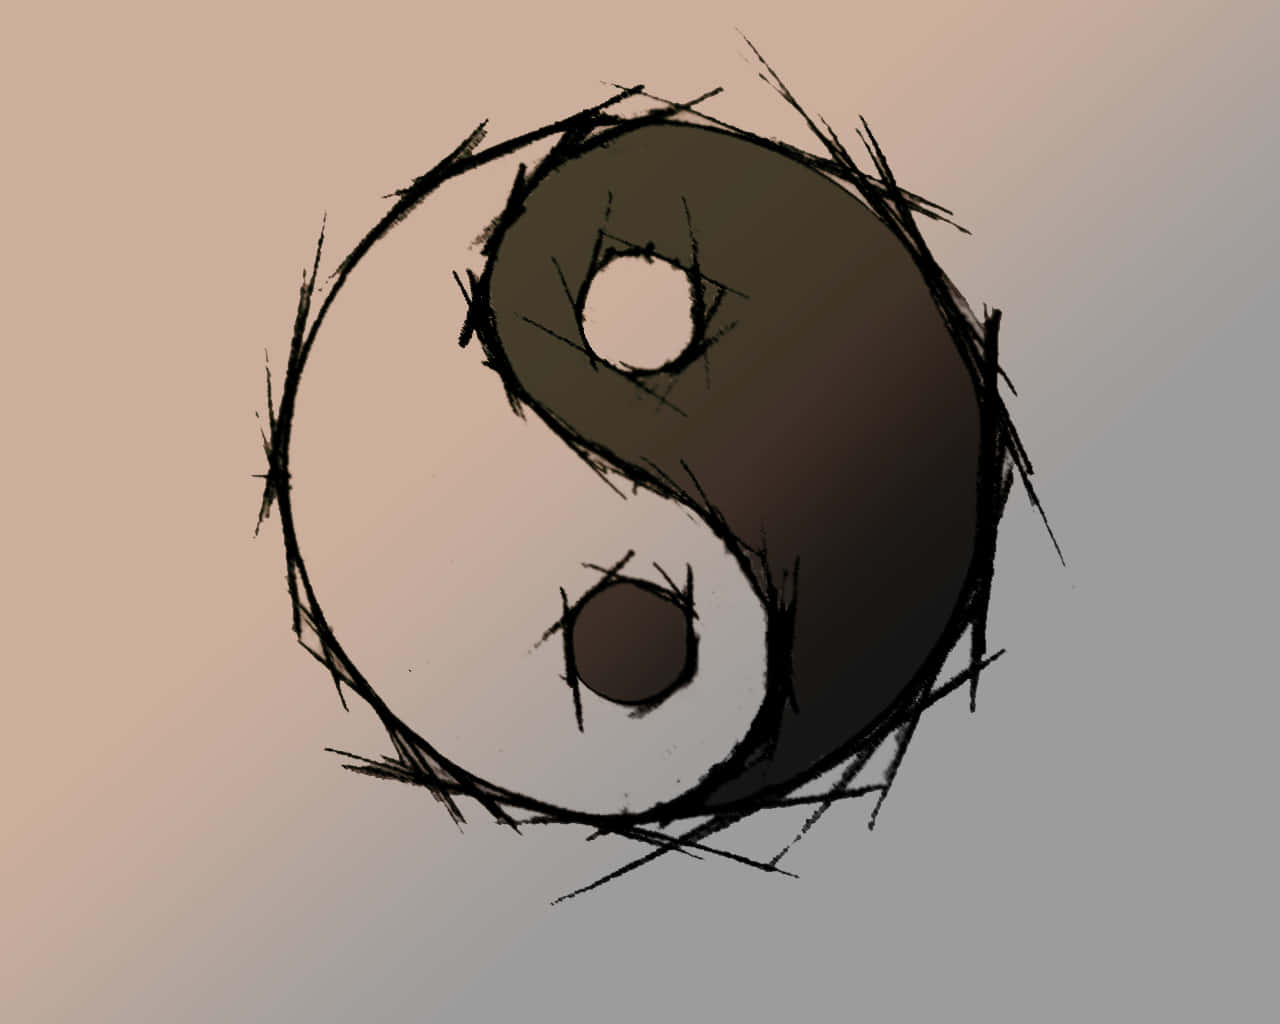 Find Balance in Ying Yang